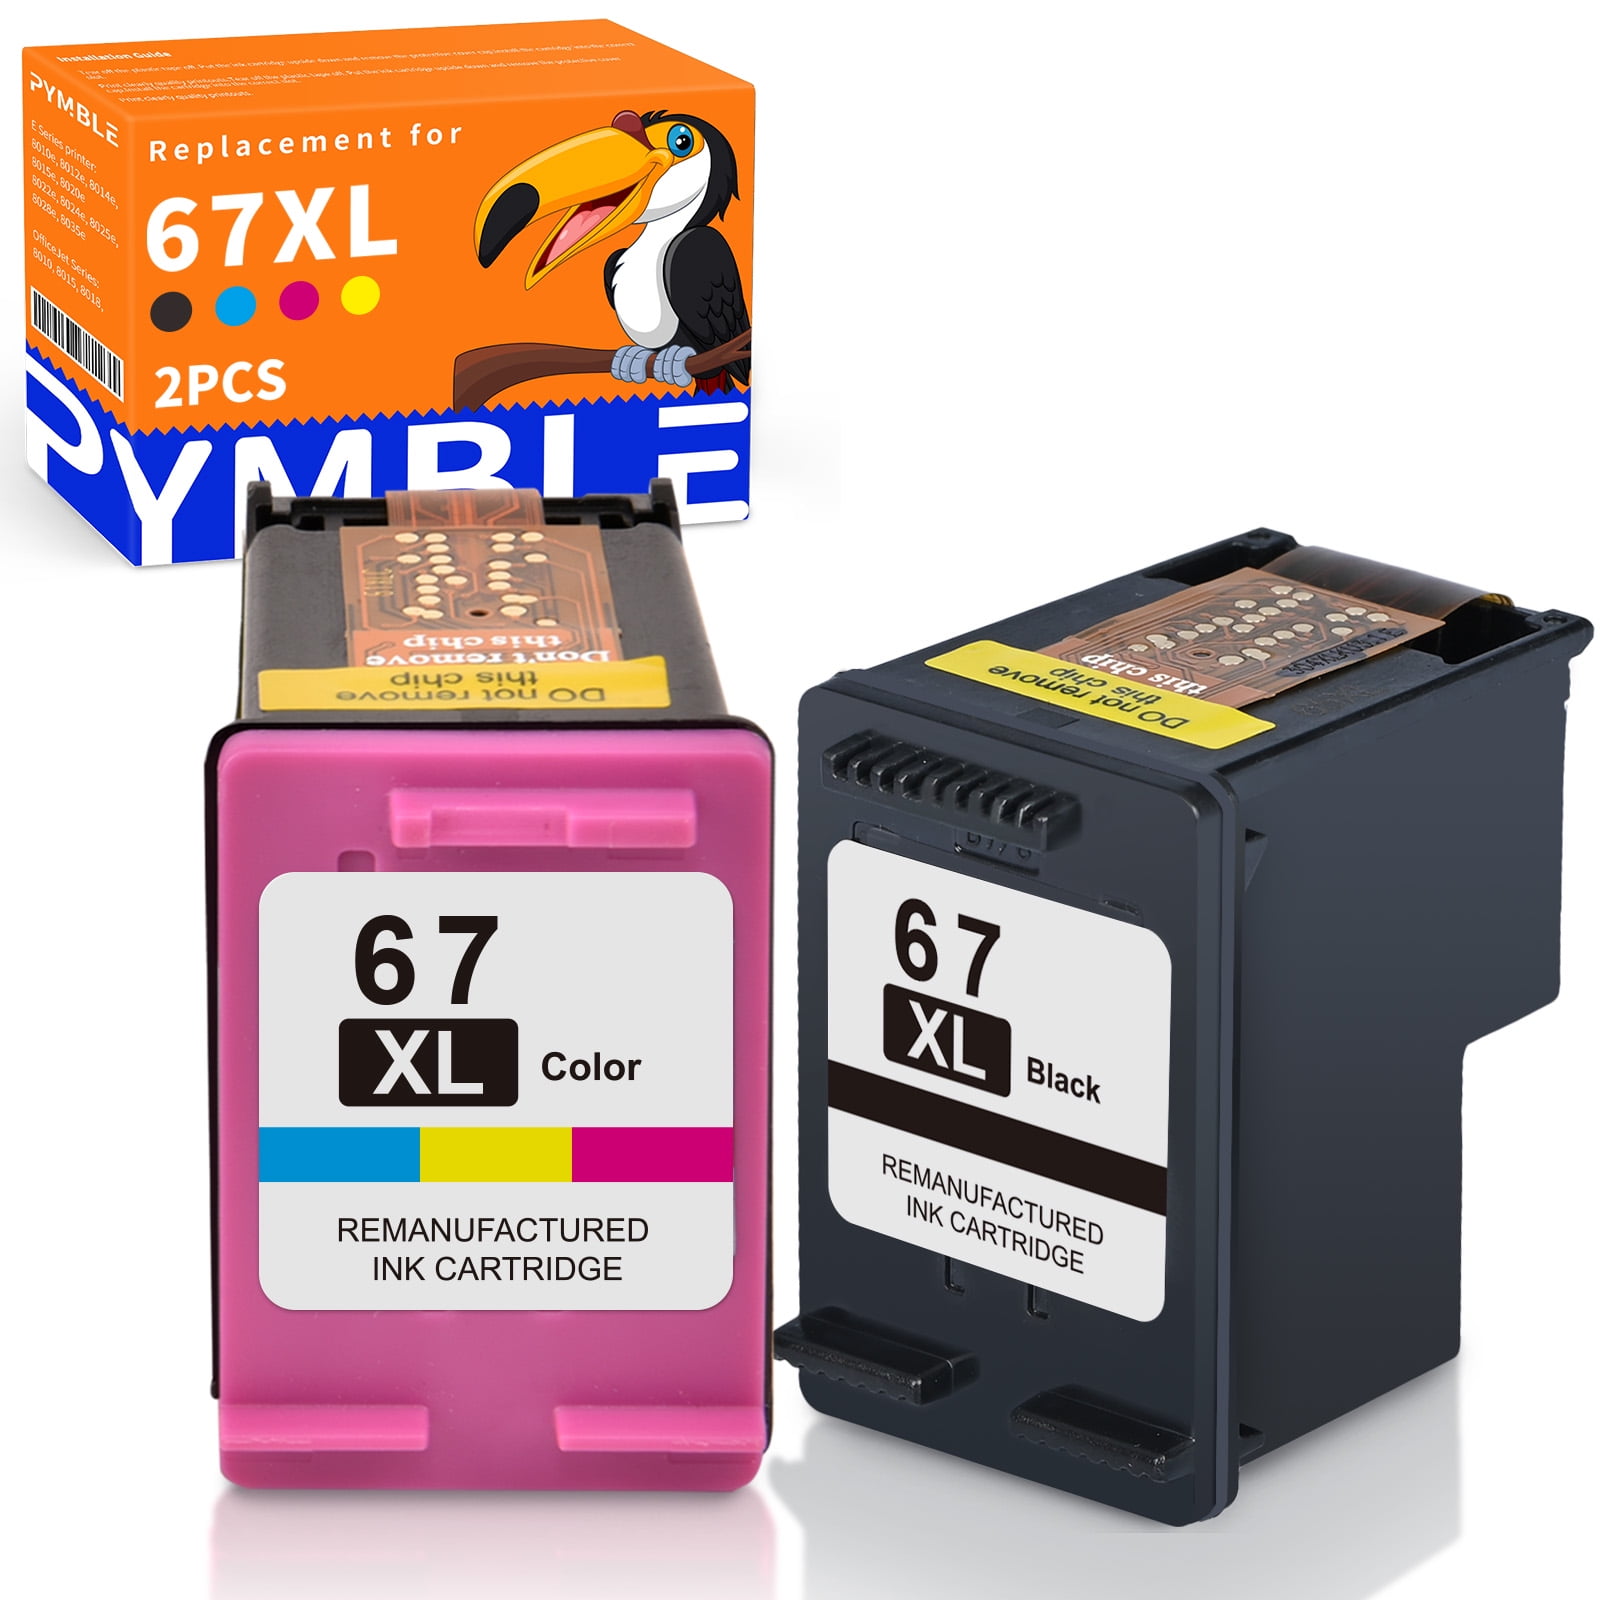 67xl 67 ink cartridge fit for HP 67 XL 67XL for HP deskjet 2700 4152 ...